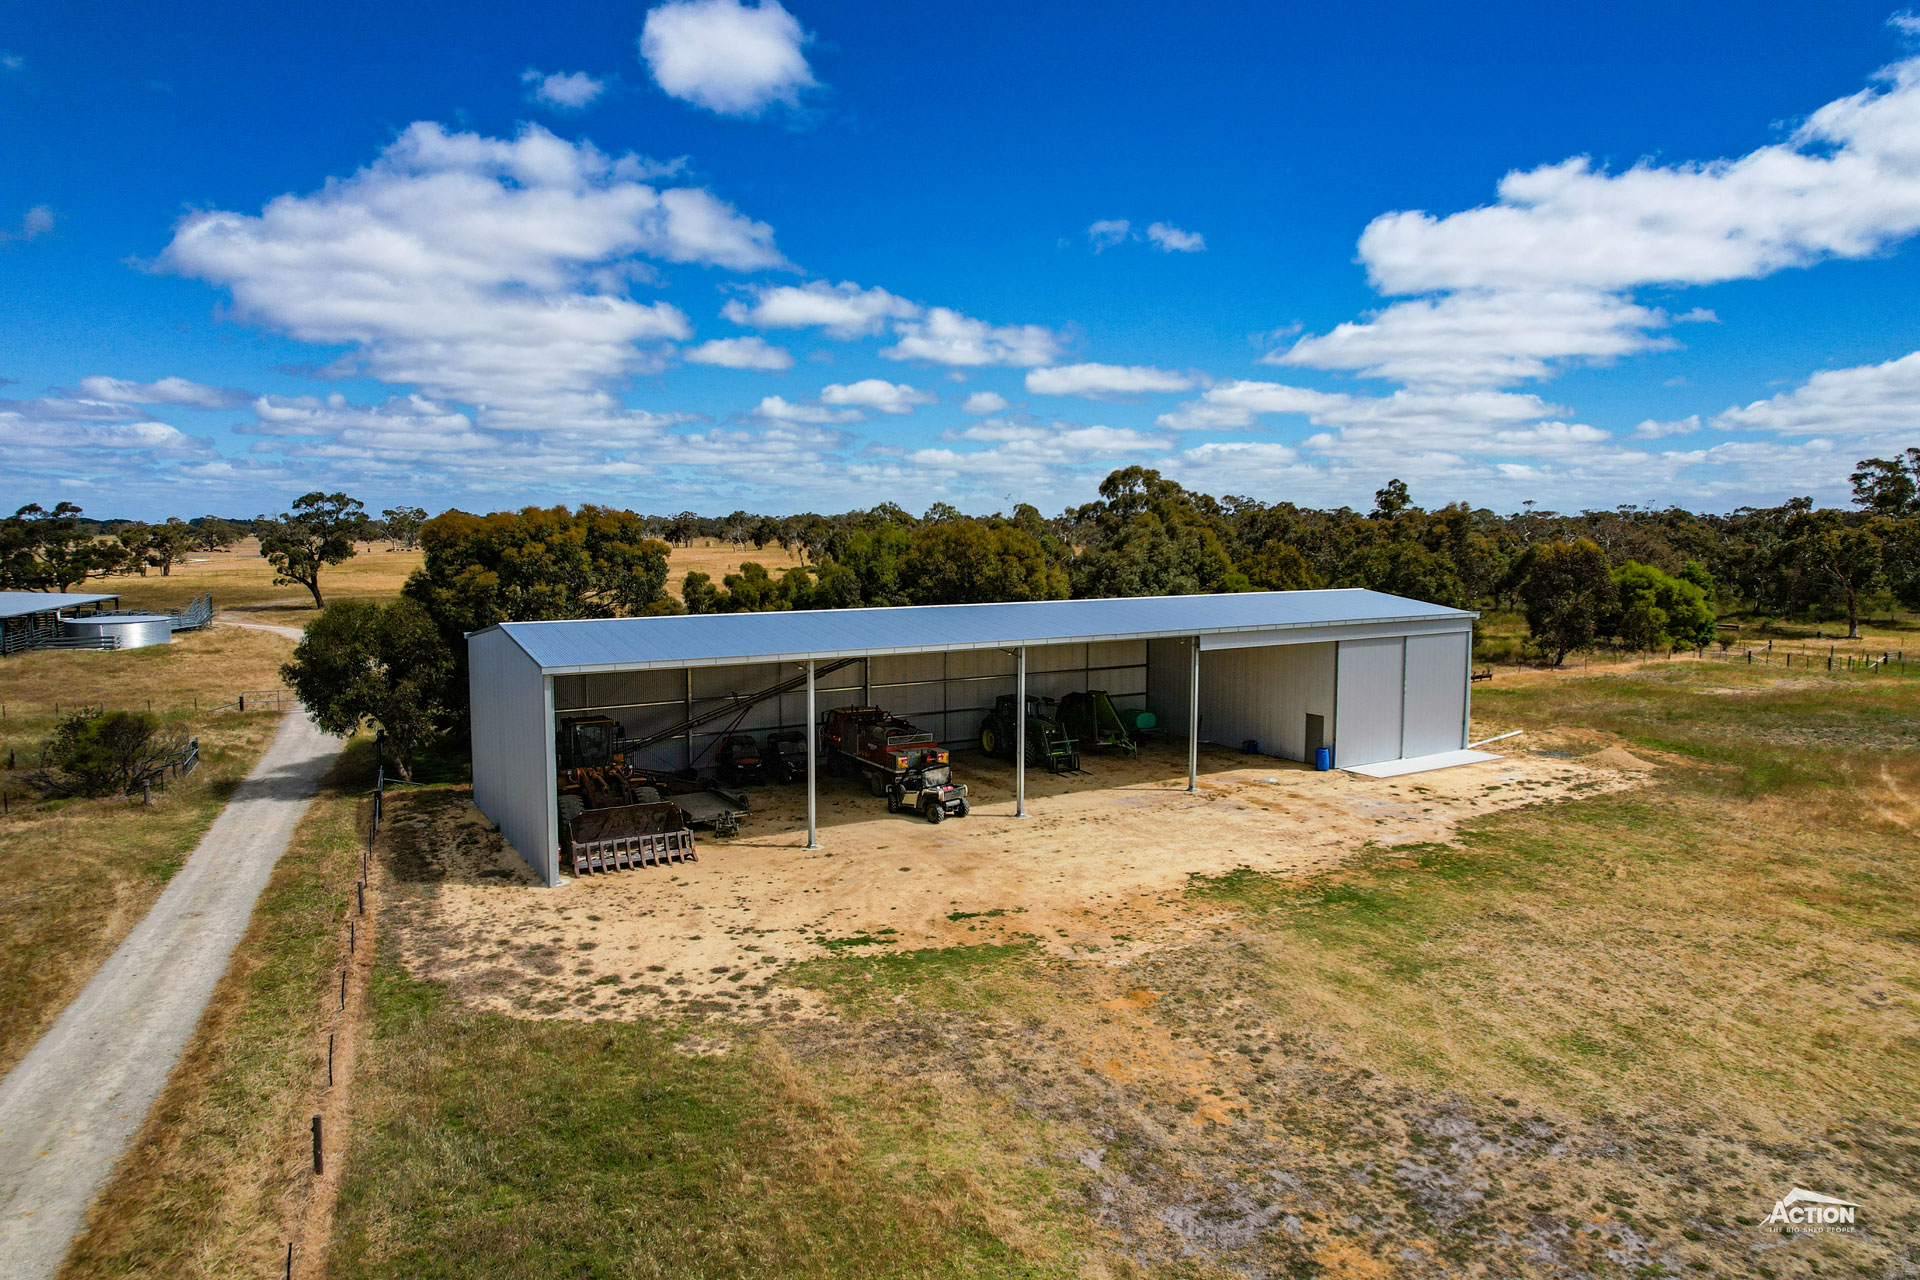 You are currently viewing 40m x 12m x 6m machinery shed